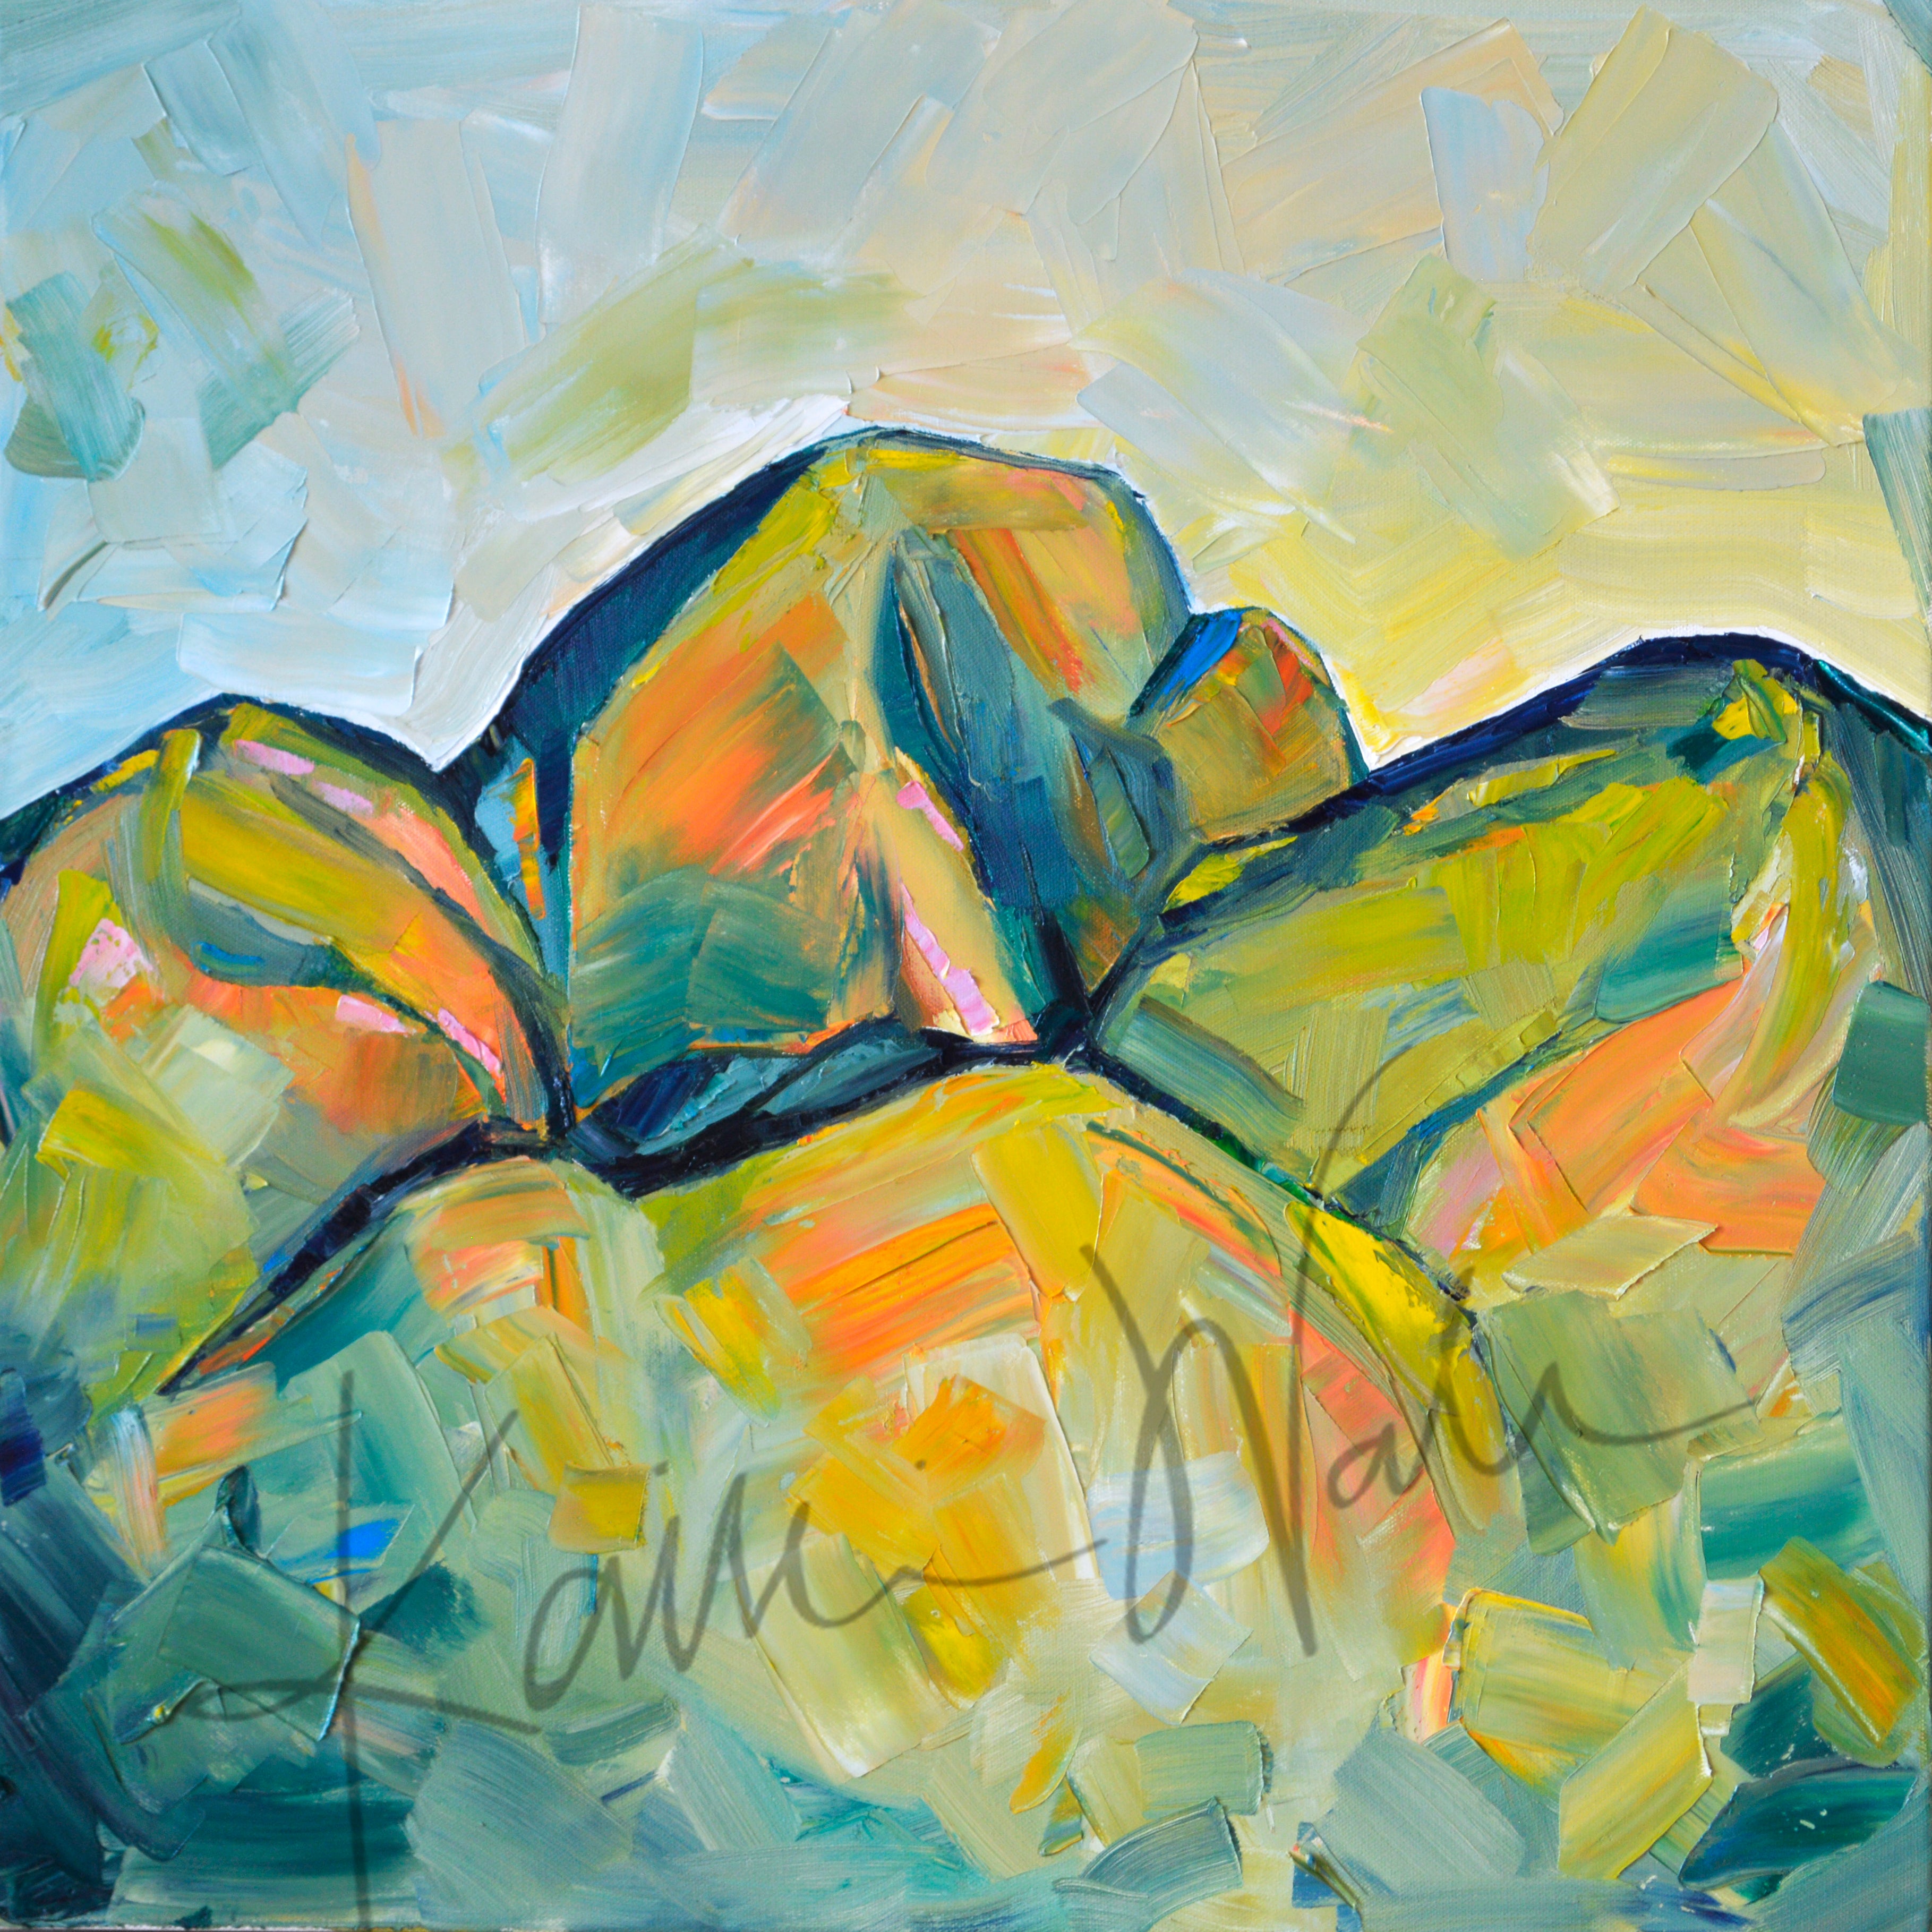 Oil painting of an abstract molar tooth painted to look like mountains.